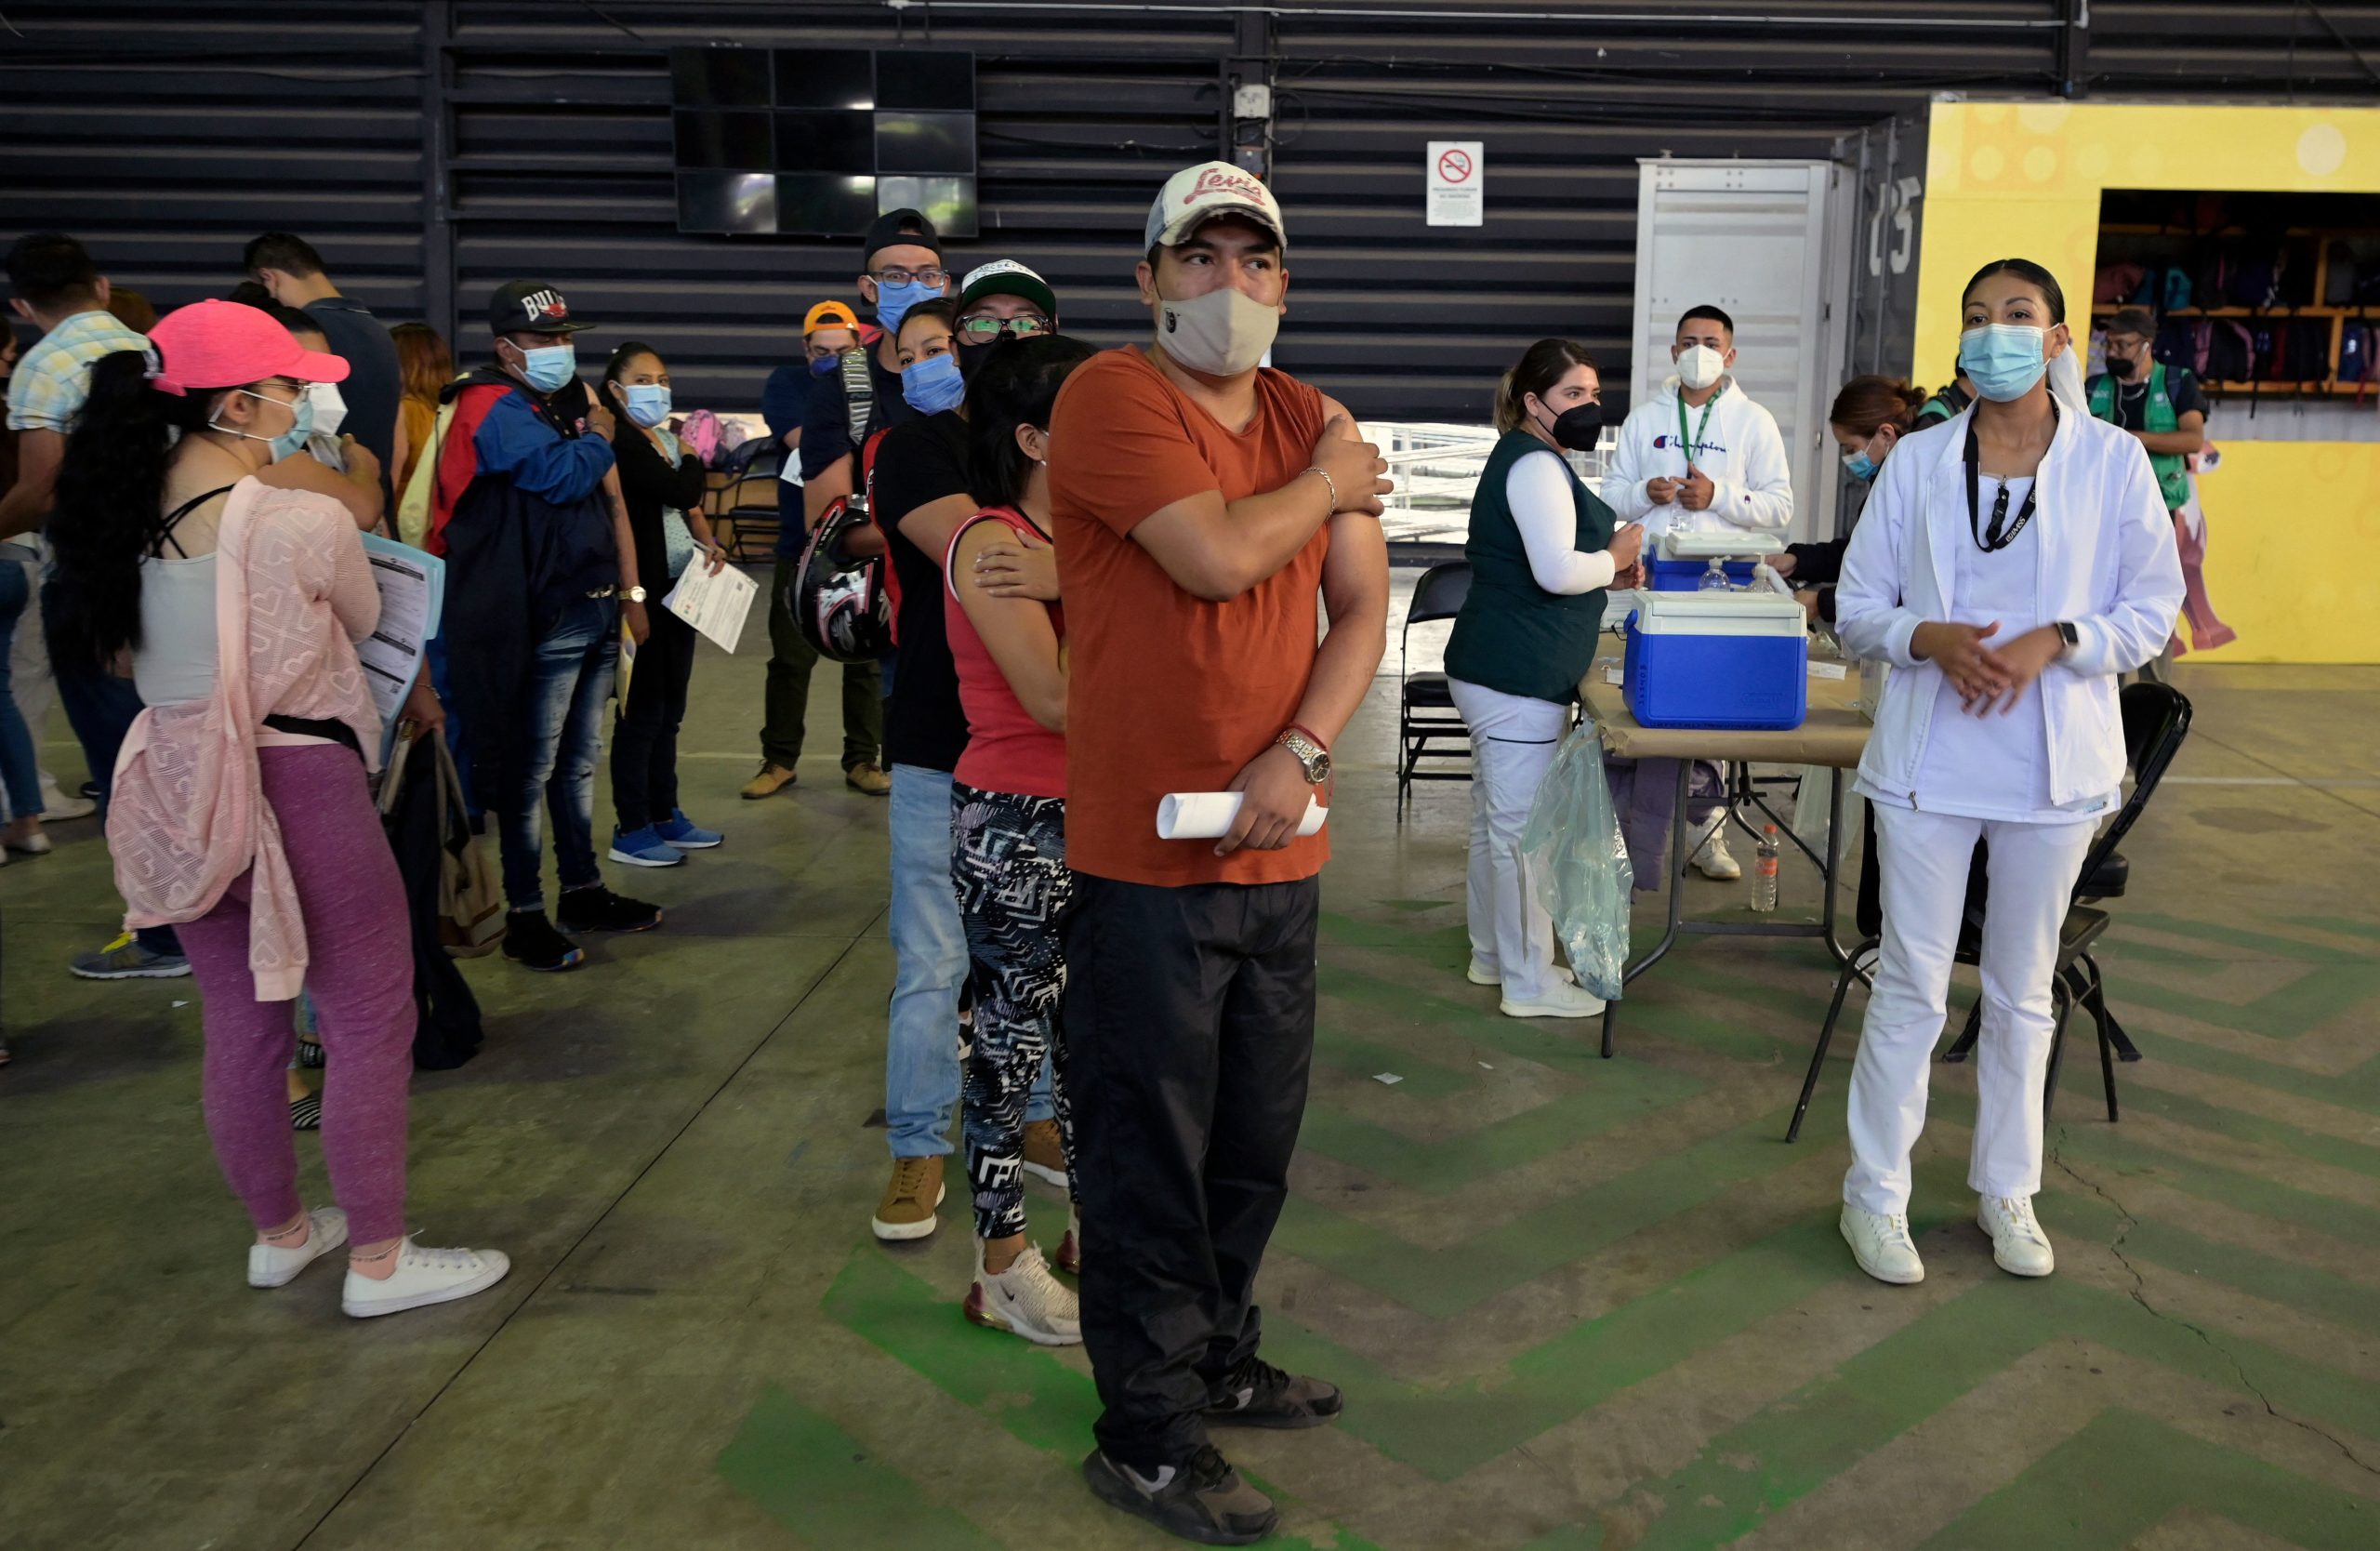 People in the range of 30 to 39 years old are seen after receiving their first dose of the AstraZeneca vaccine against Covid-19, at the Palacio de los Deportes in Mexico City, on July 13, 2021. (Photo by ALFREDO ESTRELLA/AFP via Getty Images)